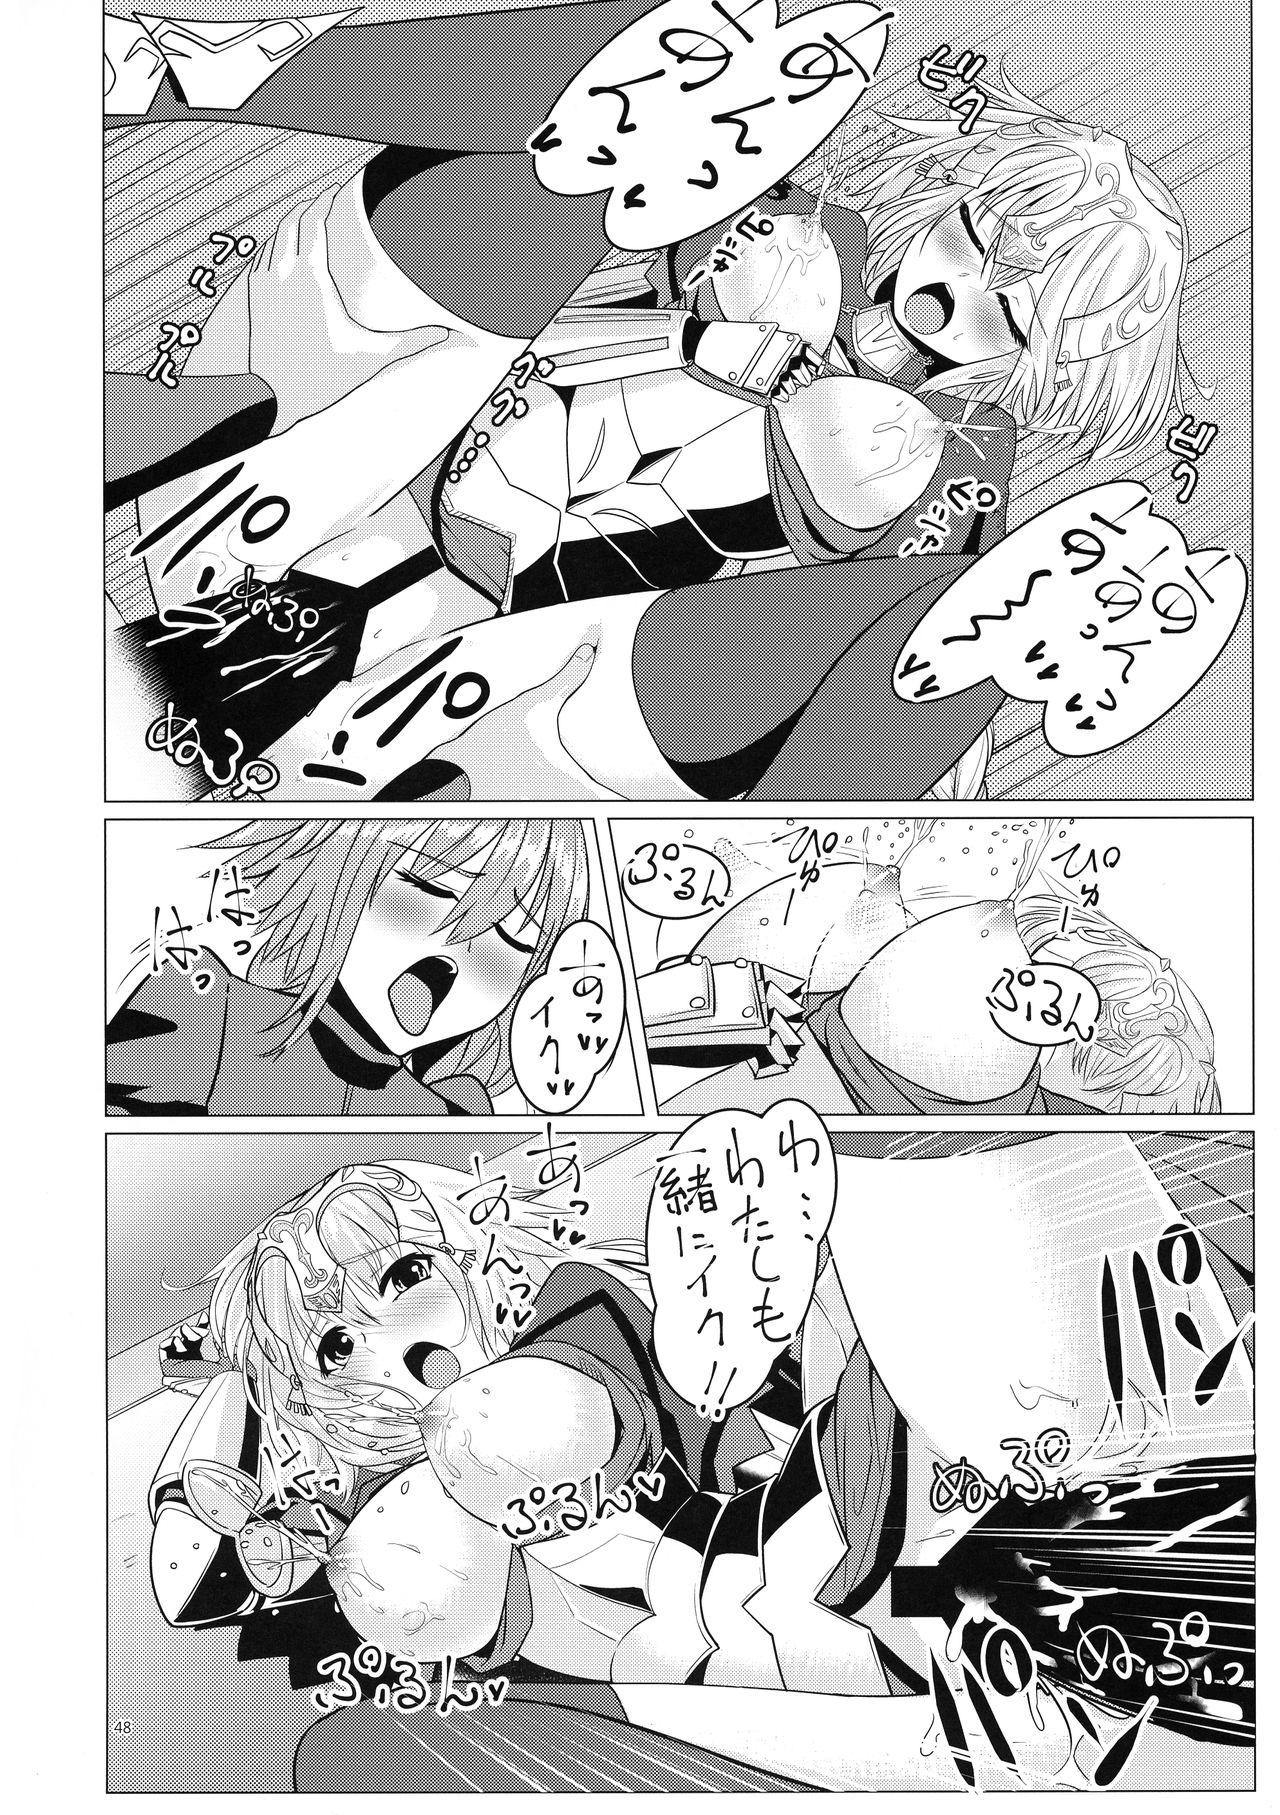 Matching Spirits - Jeanne and Astolfo have sex 44